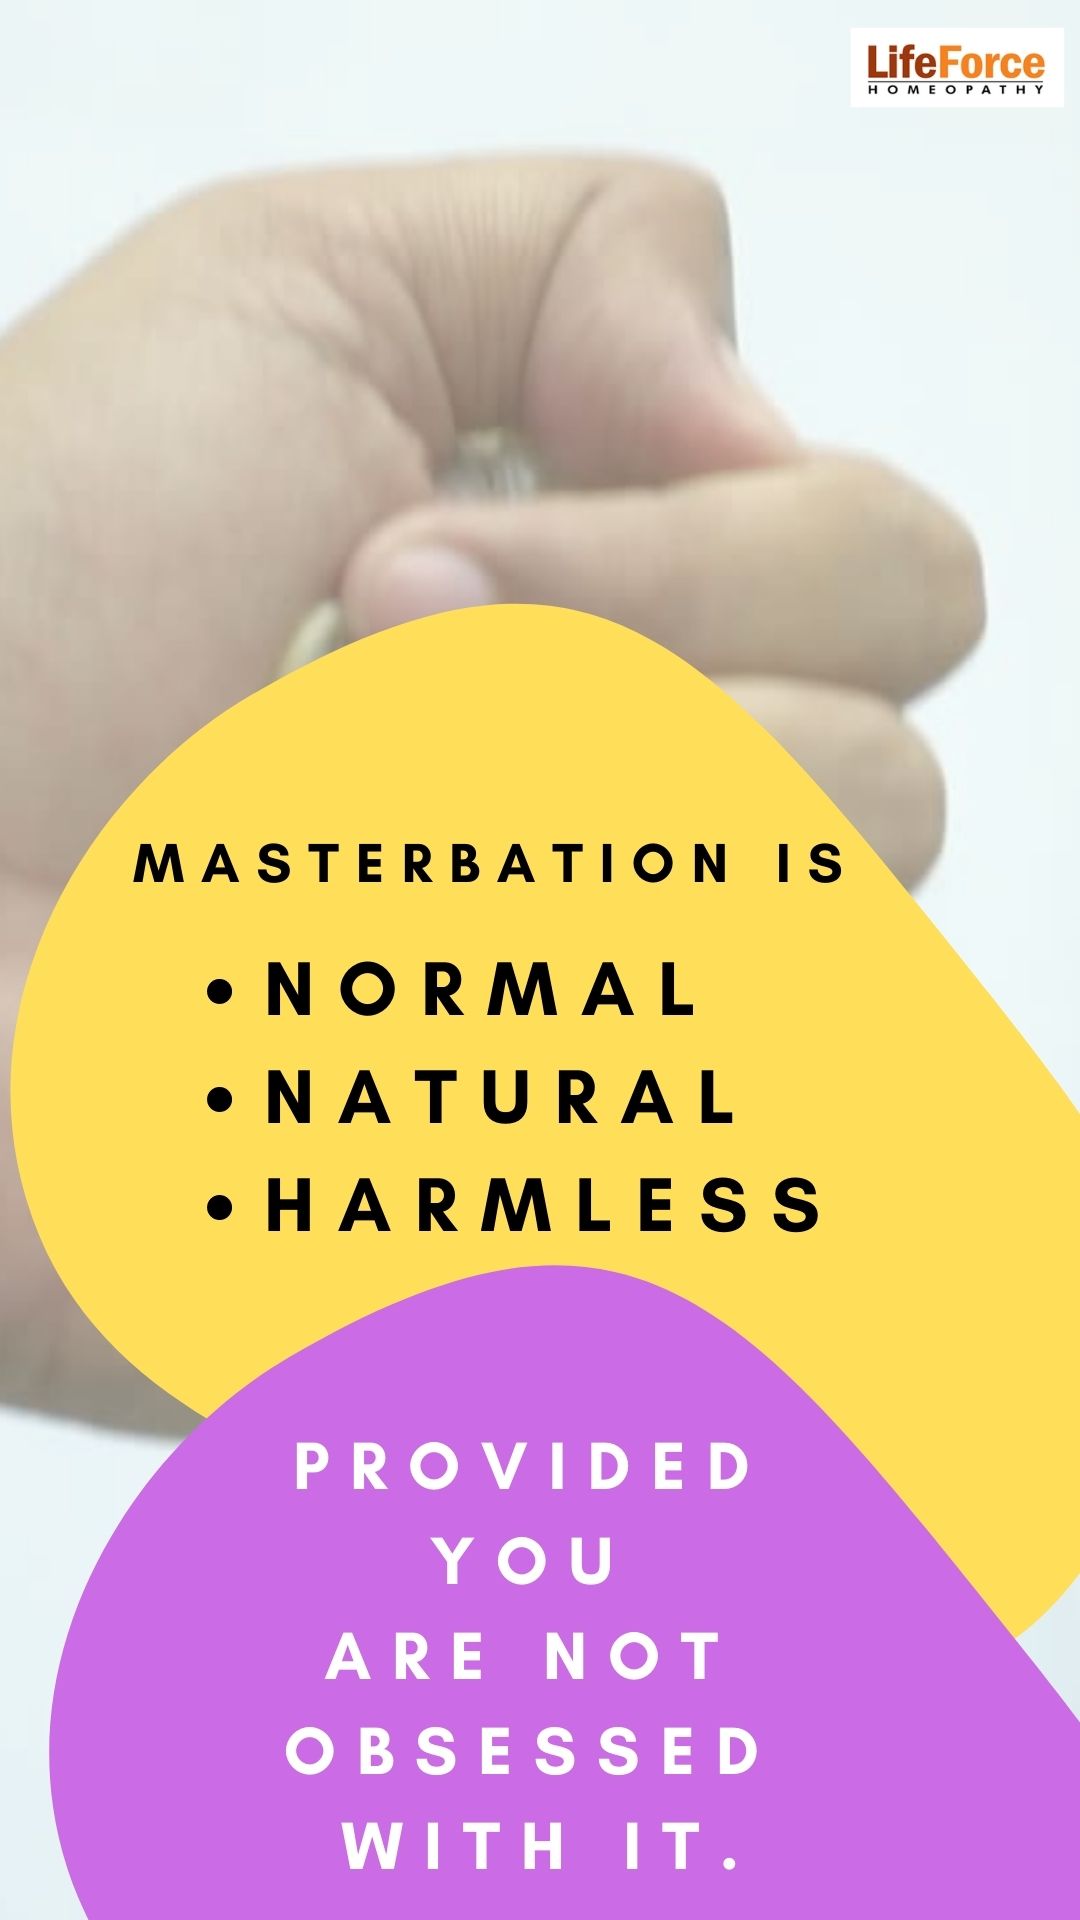 Masturbation Syndrome Myths And Facts To Know About It pic